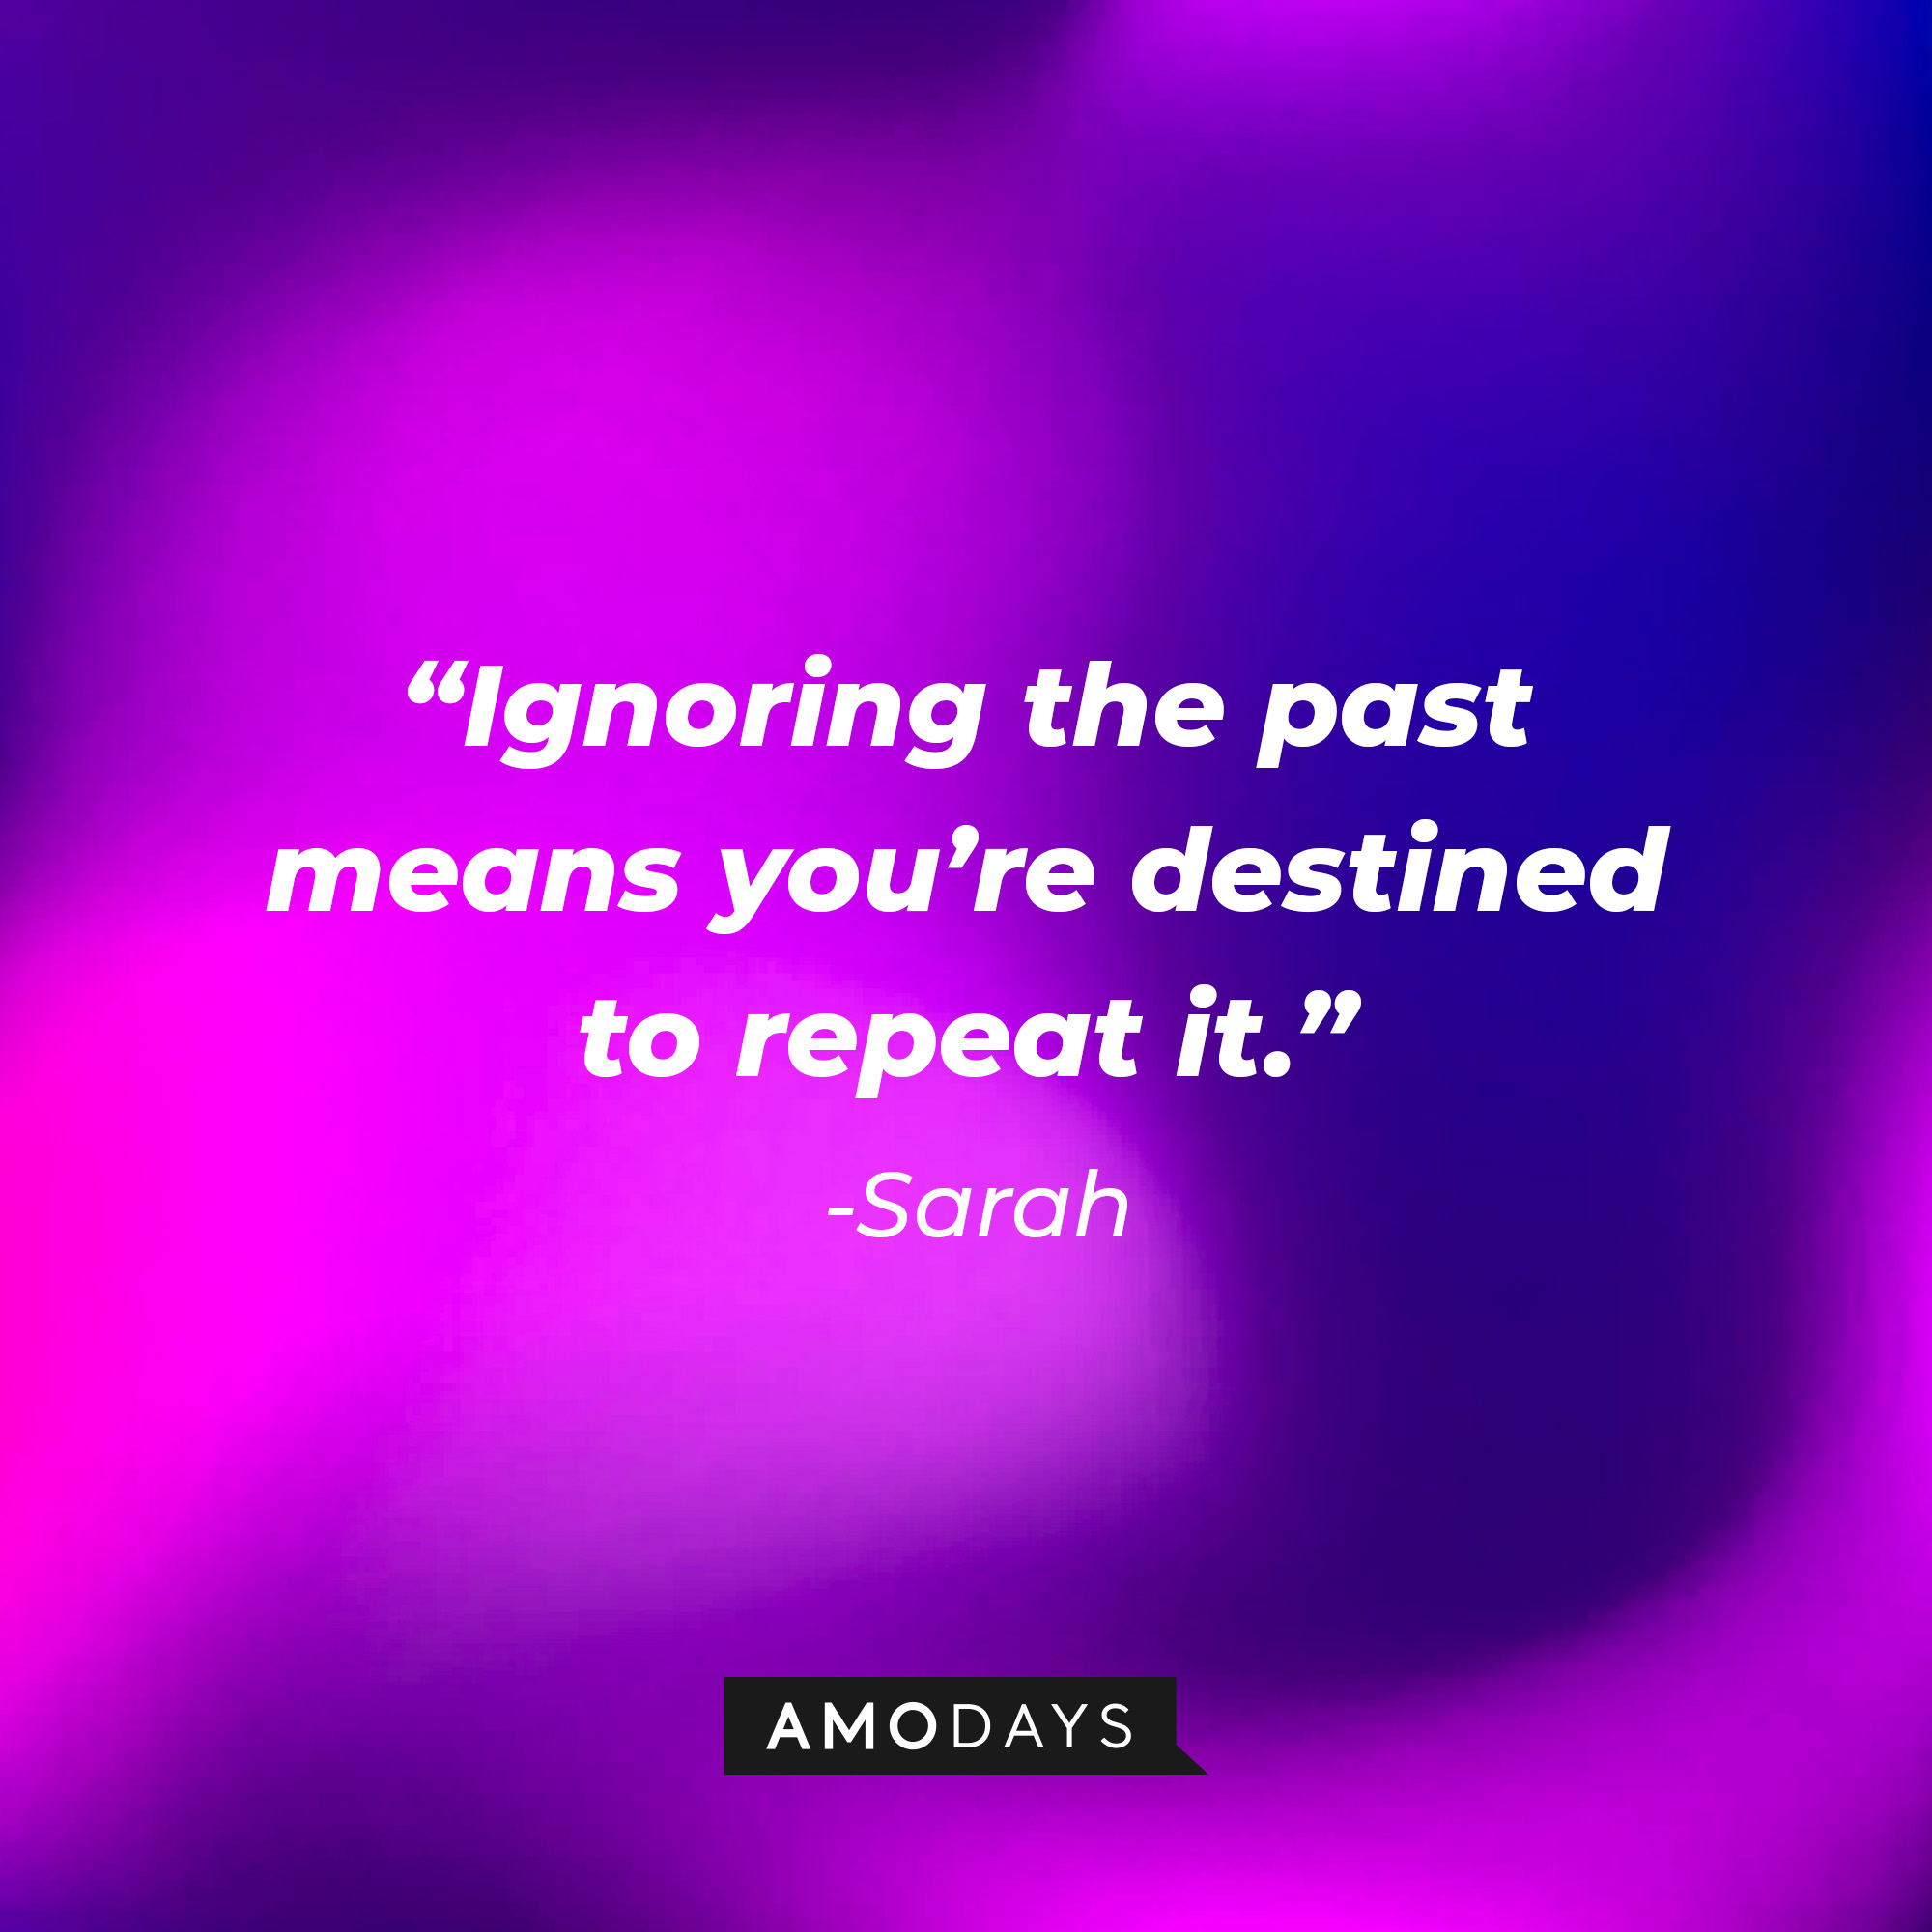 Sarah's quote: “Ignoring the past means you’re destined to repeat it.” │Source: AmoDays